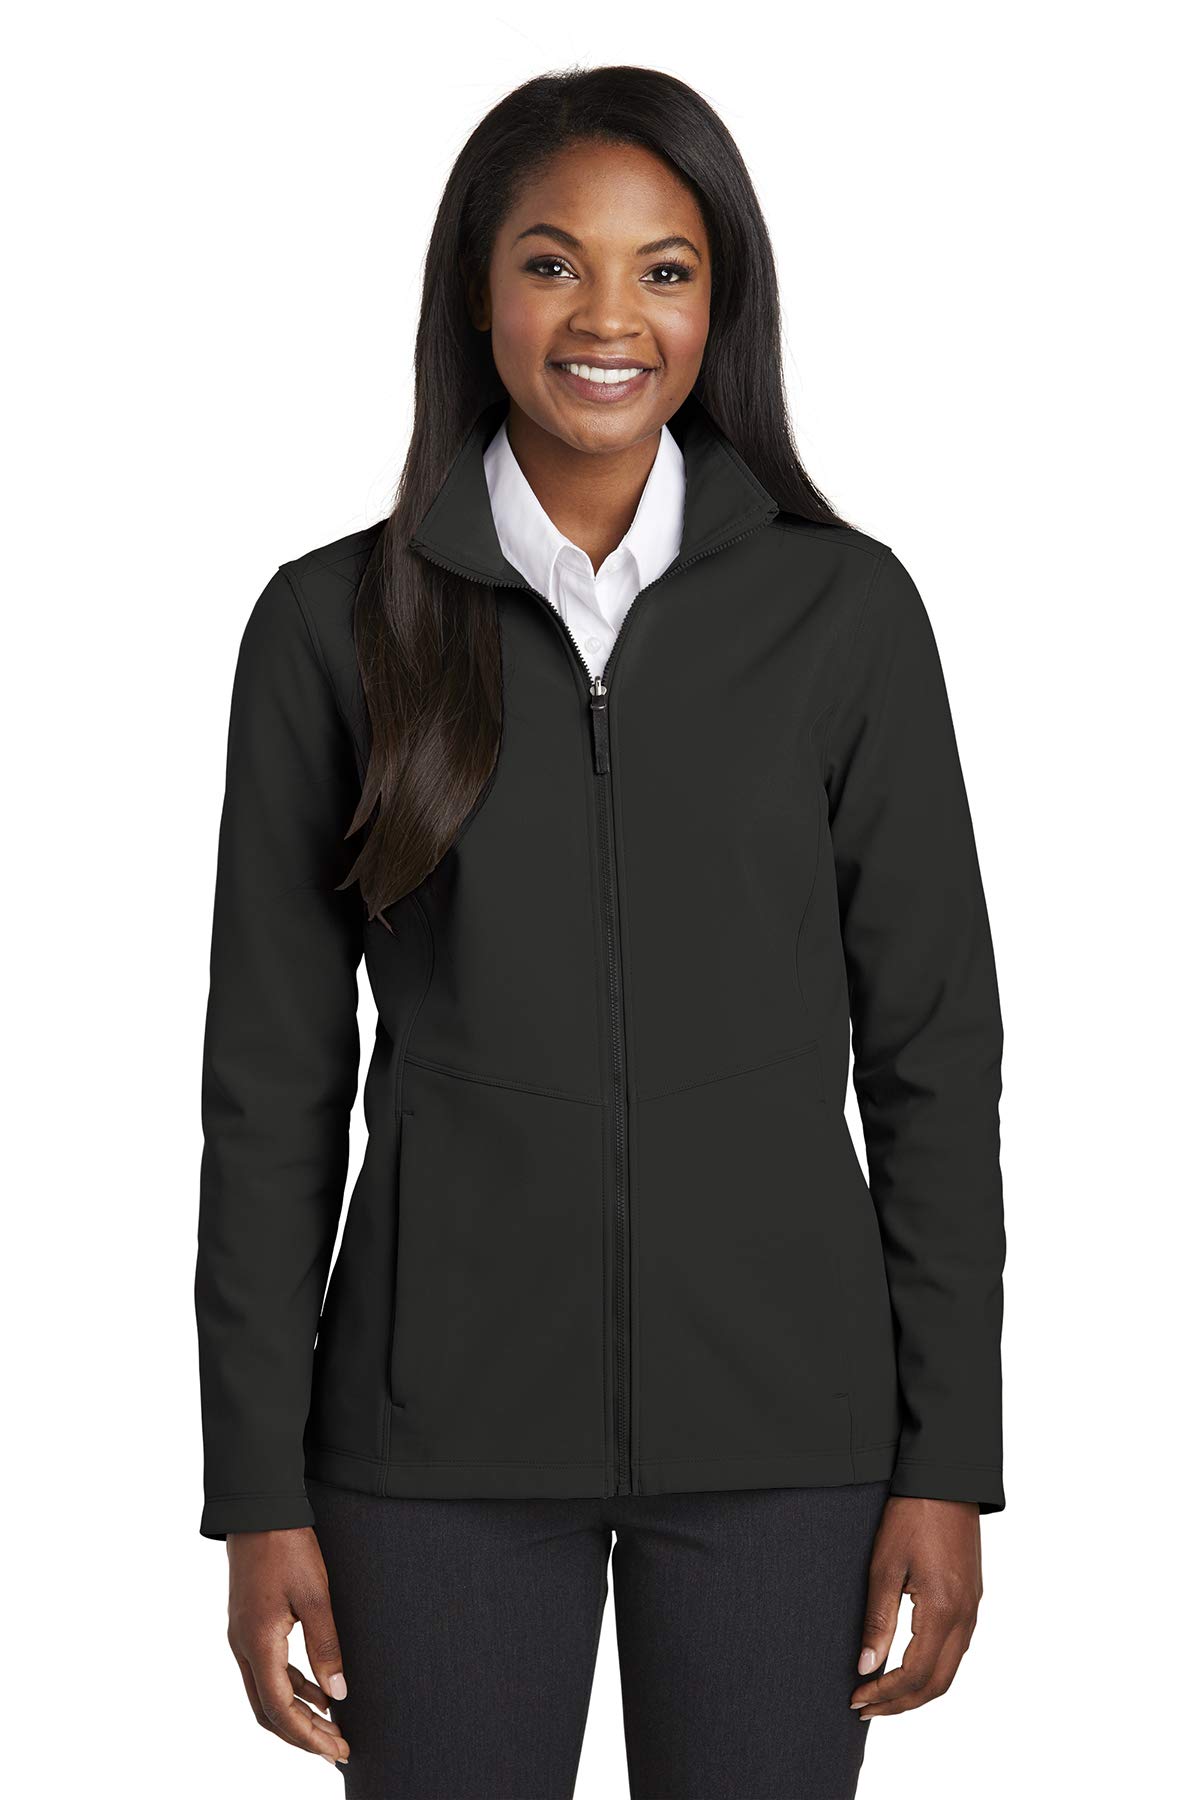 Port Authority Women's Collective Soft Shell Jacket, Deep Black, X-Large